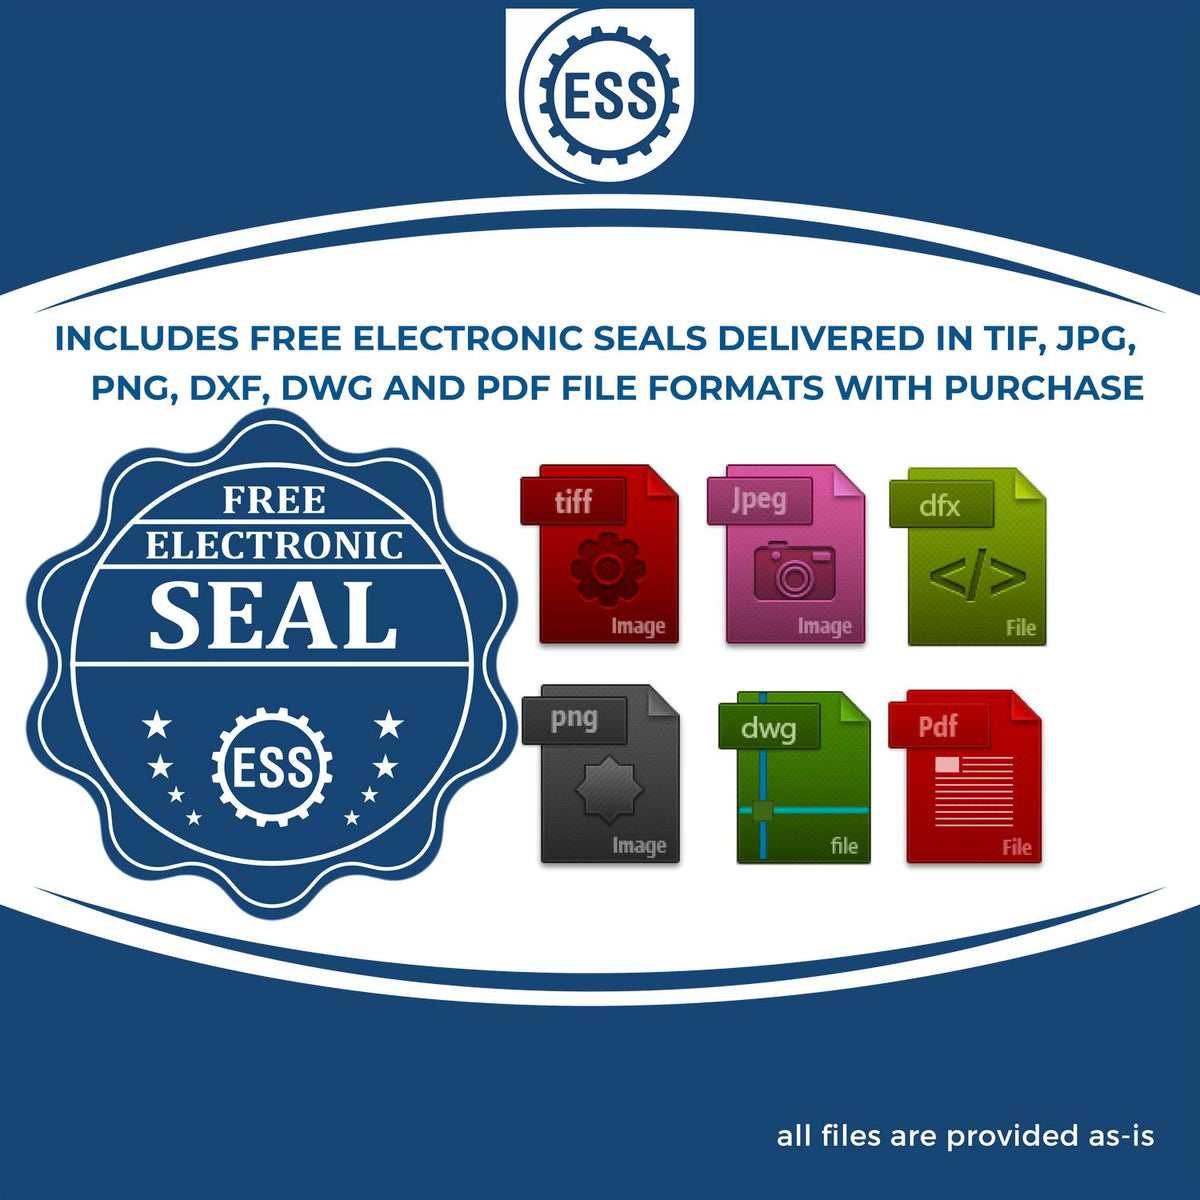 An infographic for the free electronic seal for the Slim Pre-Inked State Seal Notary Stamp for Arizona illustrating the different file type icons such as DXF, DWG, TIF, JPG and PNG.